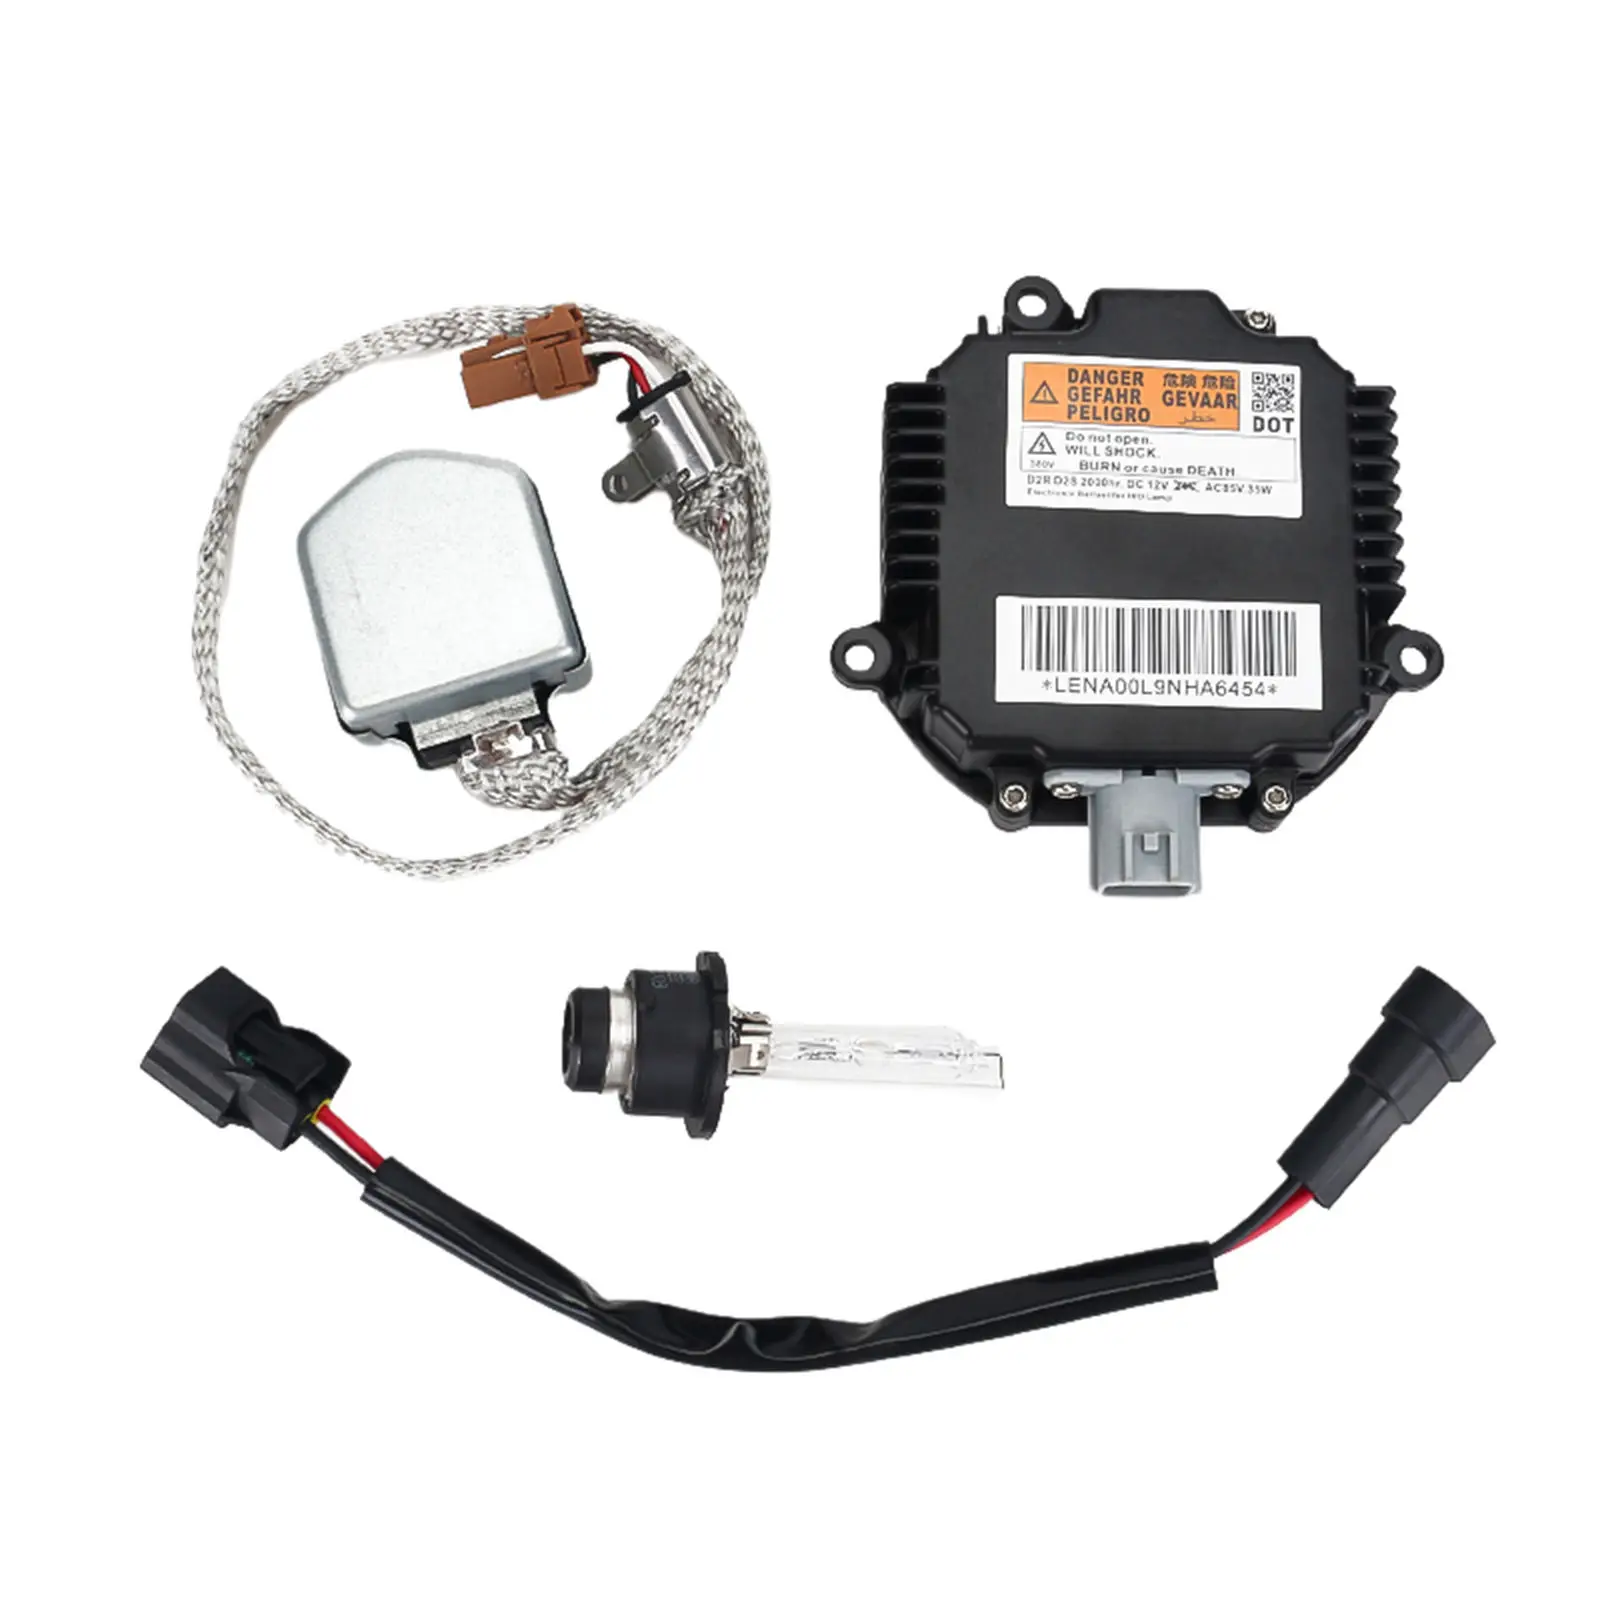 

Xenon Hid Ballast Headlight Control Unit Nzmns111Lbna G37 G35 Q60 Direct Replacement for Nissan 350Z 370Z for Nissan